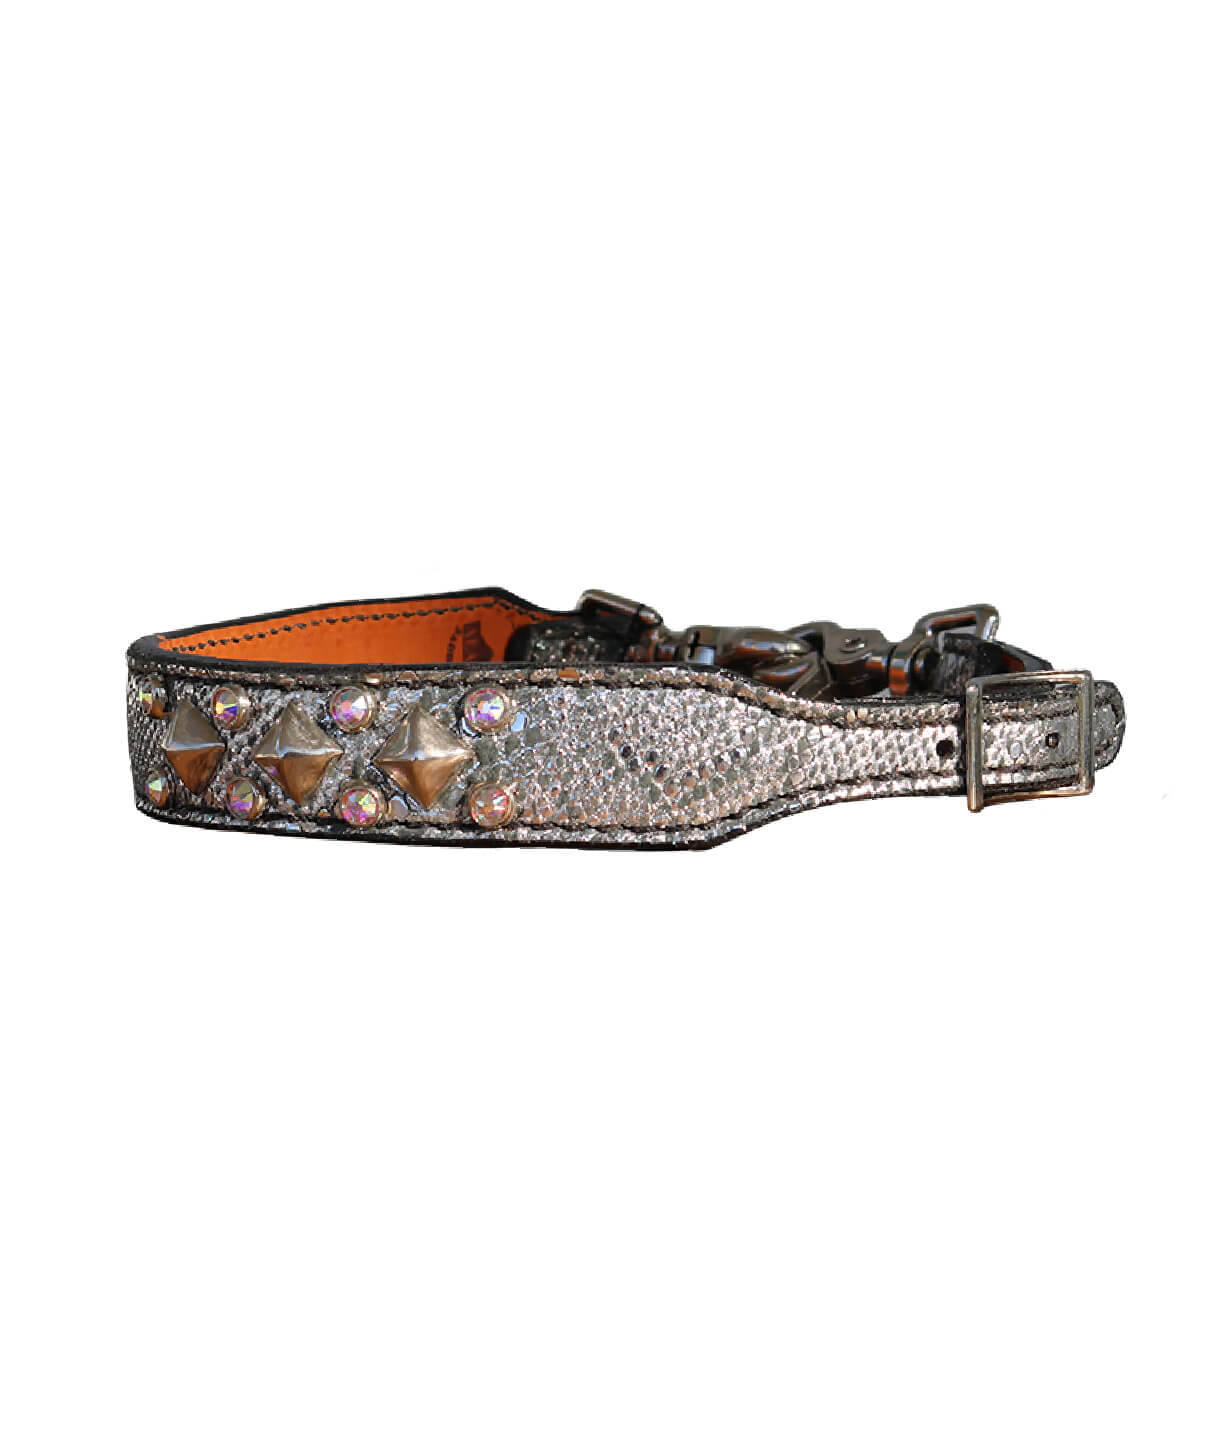 200-GPS Wither strap python overlay with crystals and spots